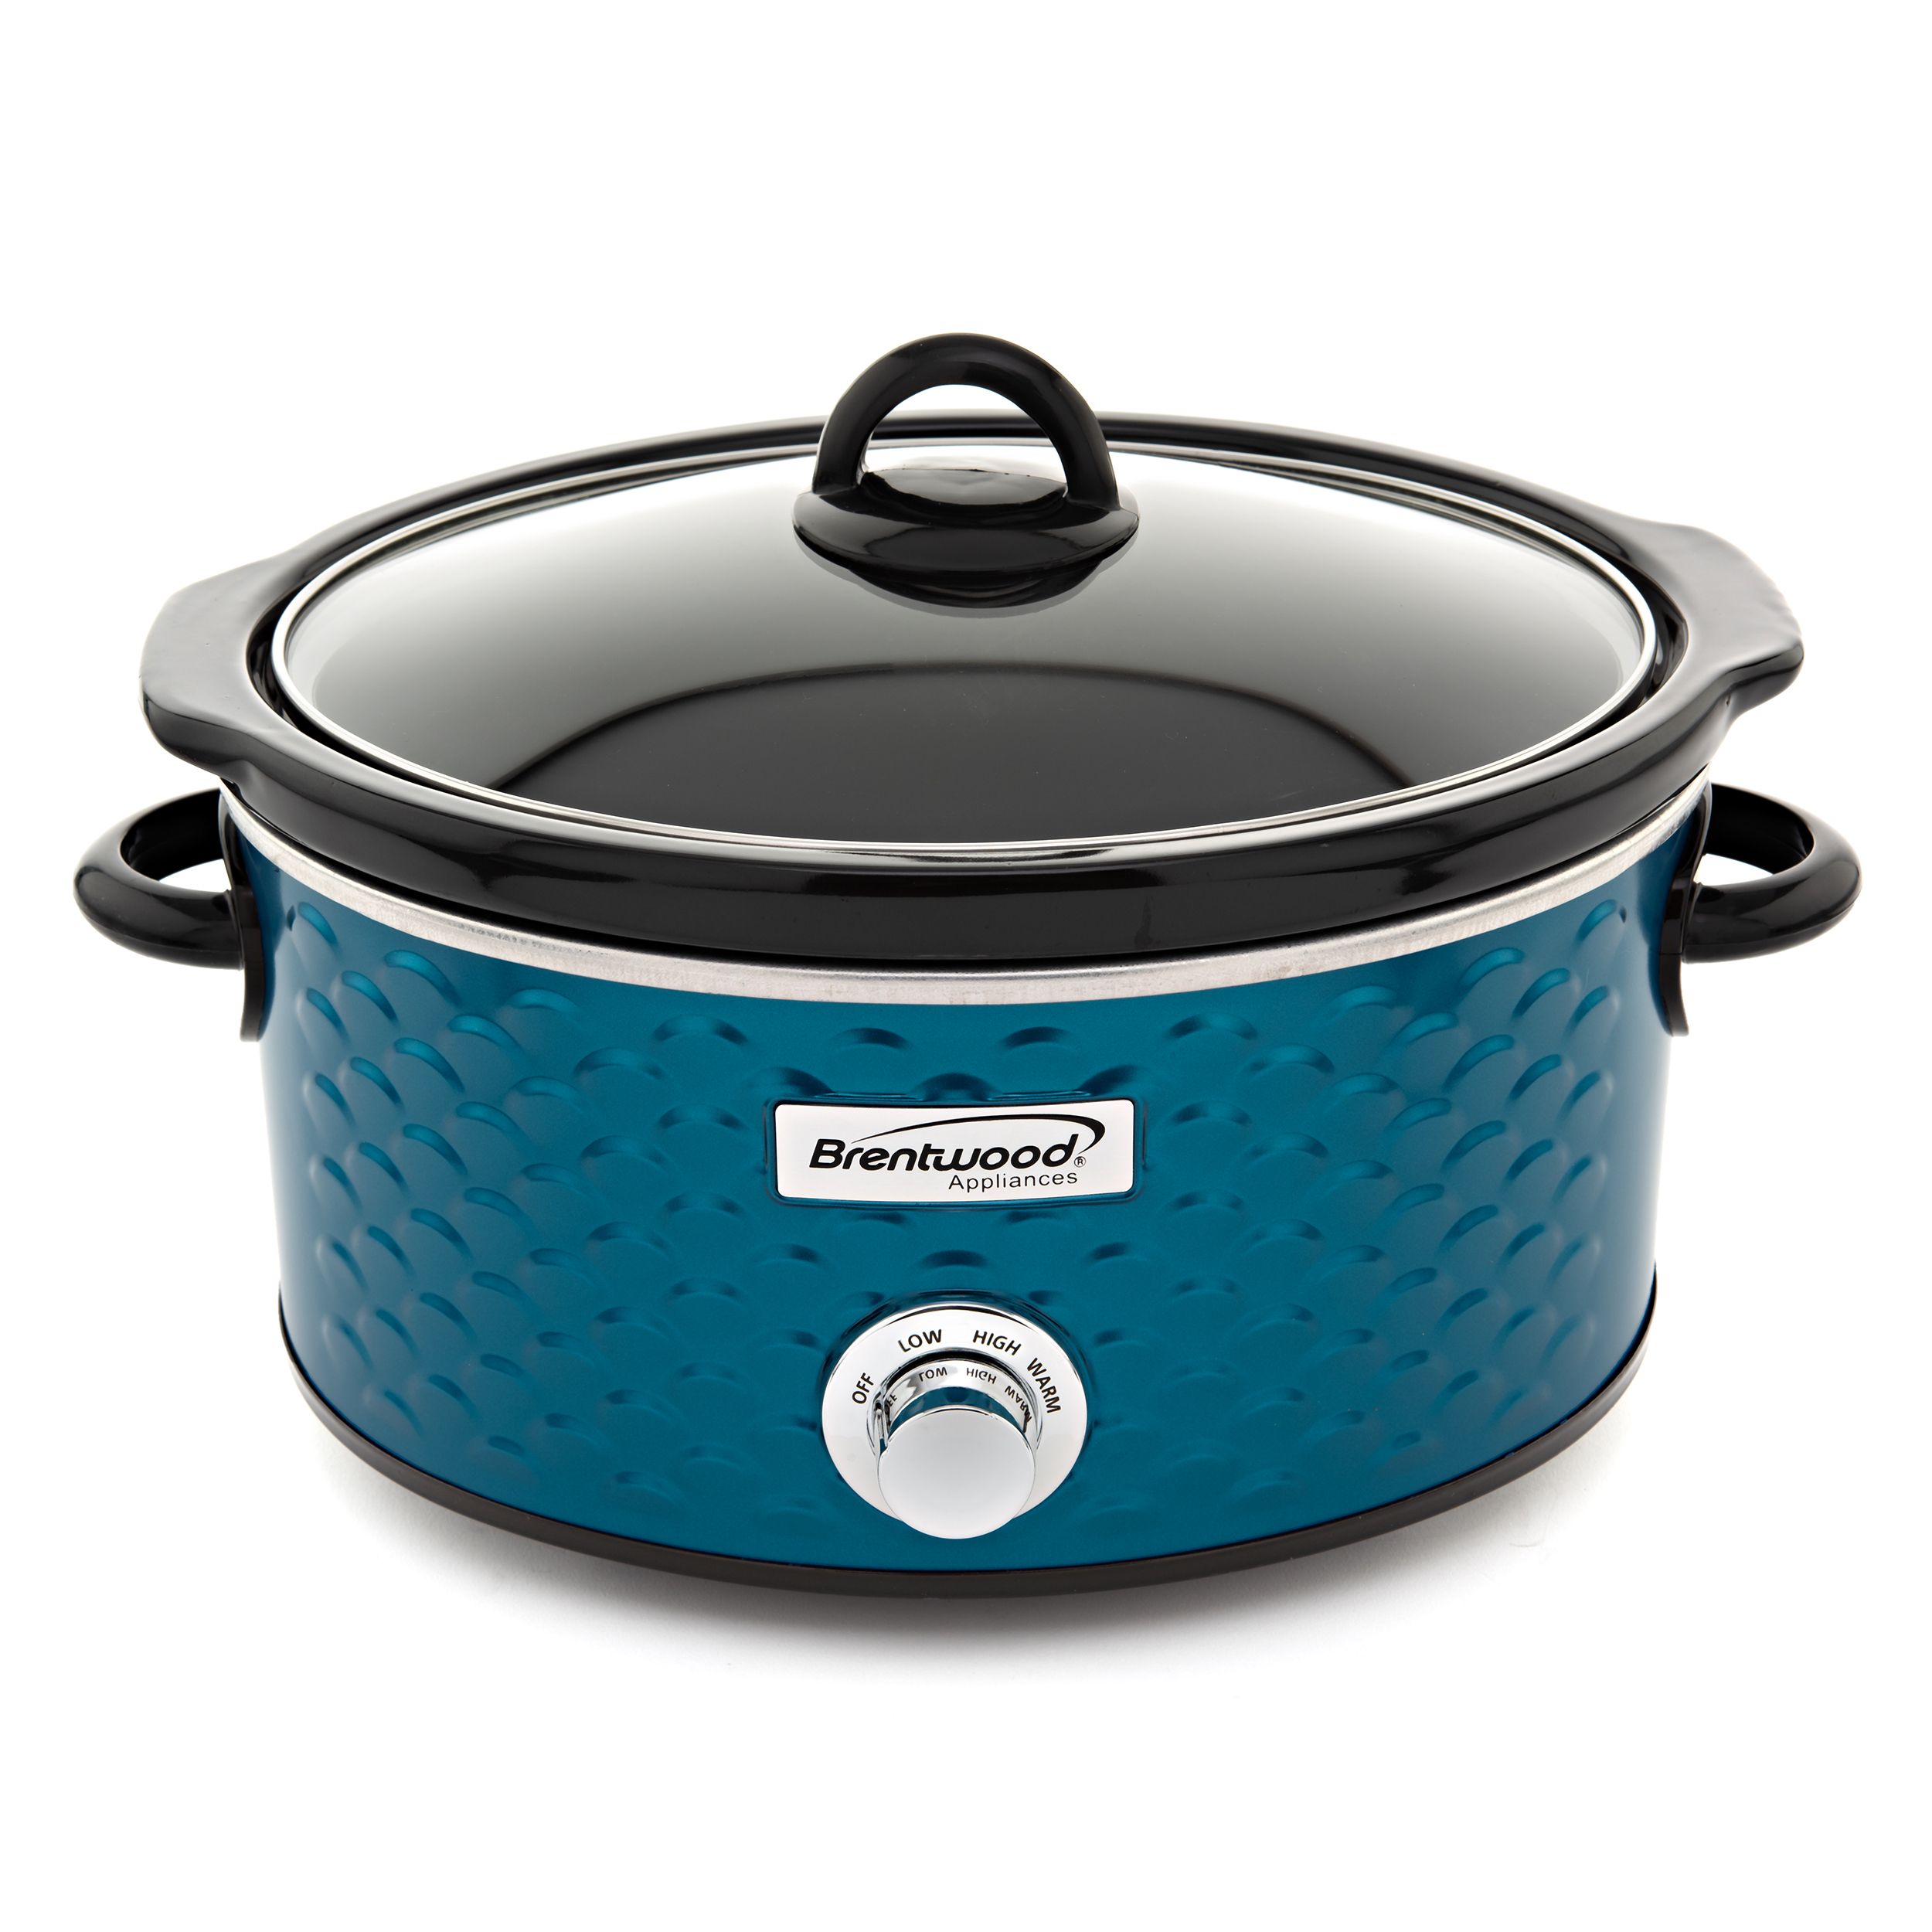 Brentwood Scallop Pattern 4.5 Quart Slow Cooker in Blue - image 1 of 2